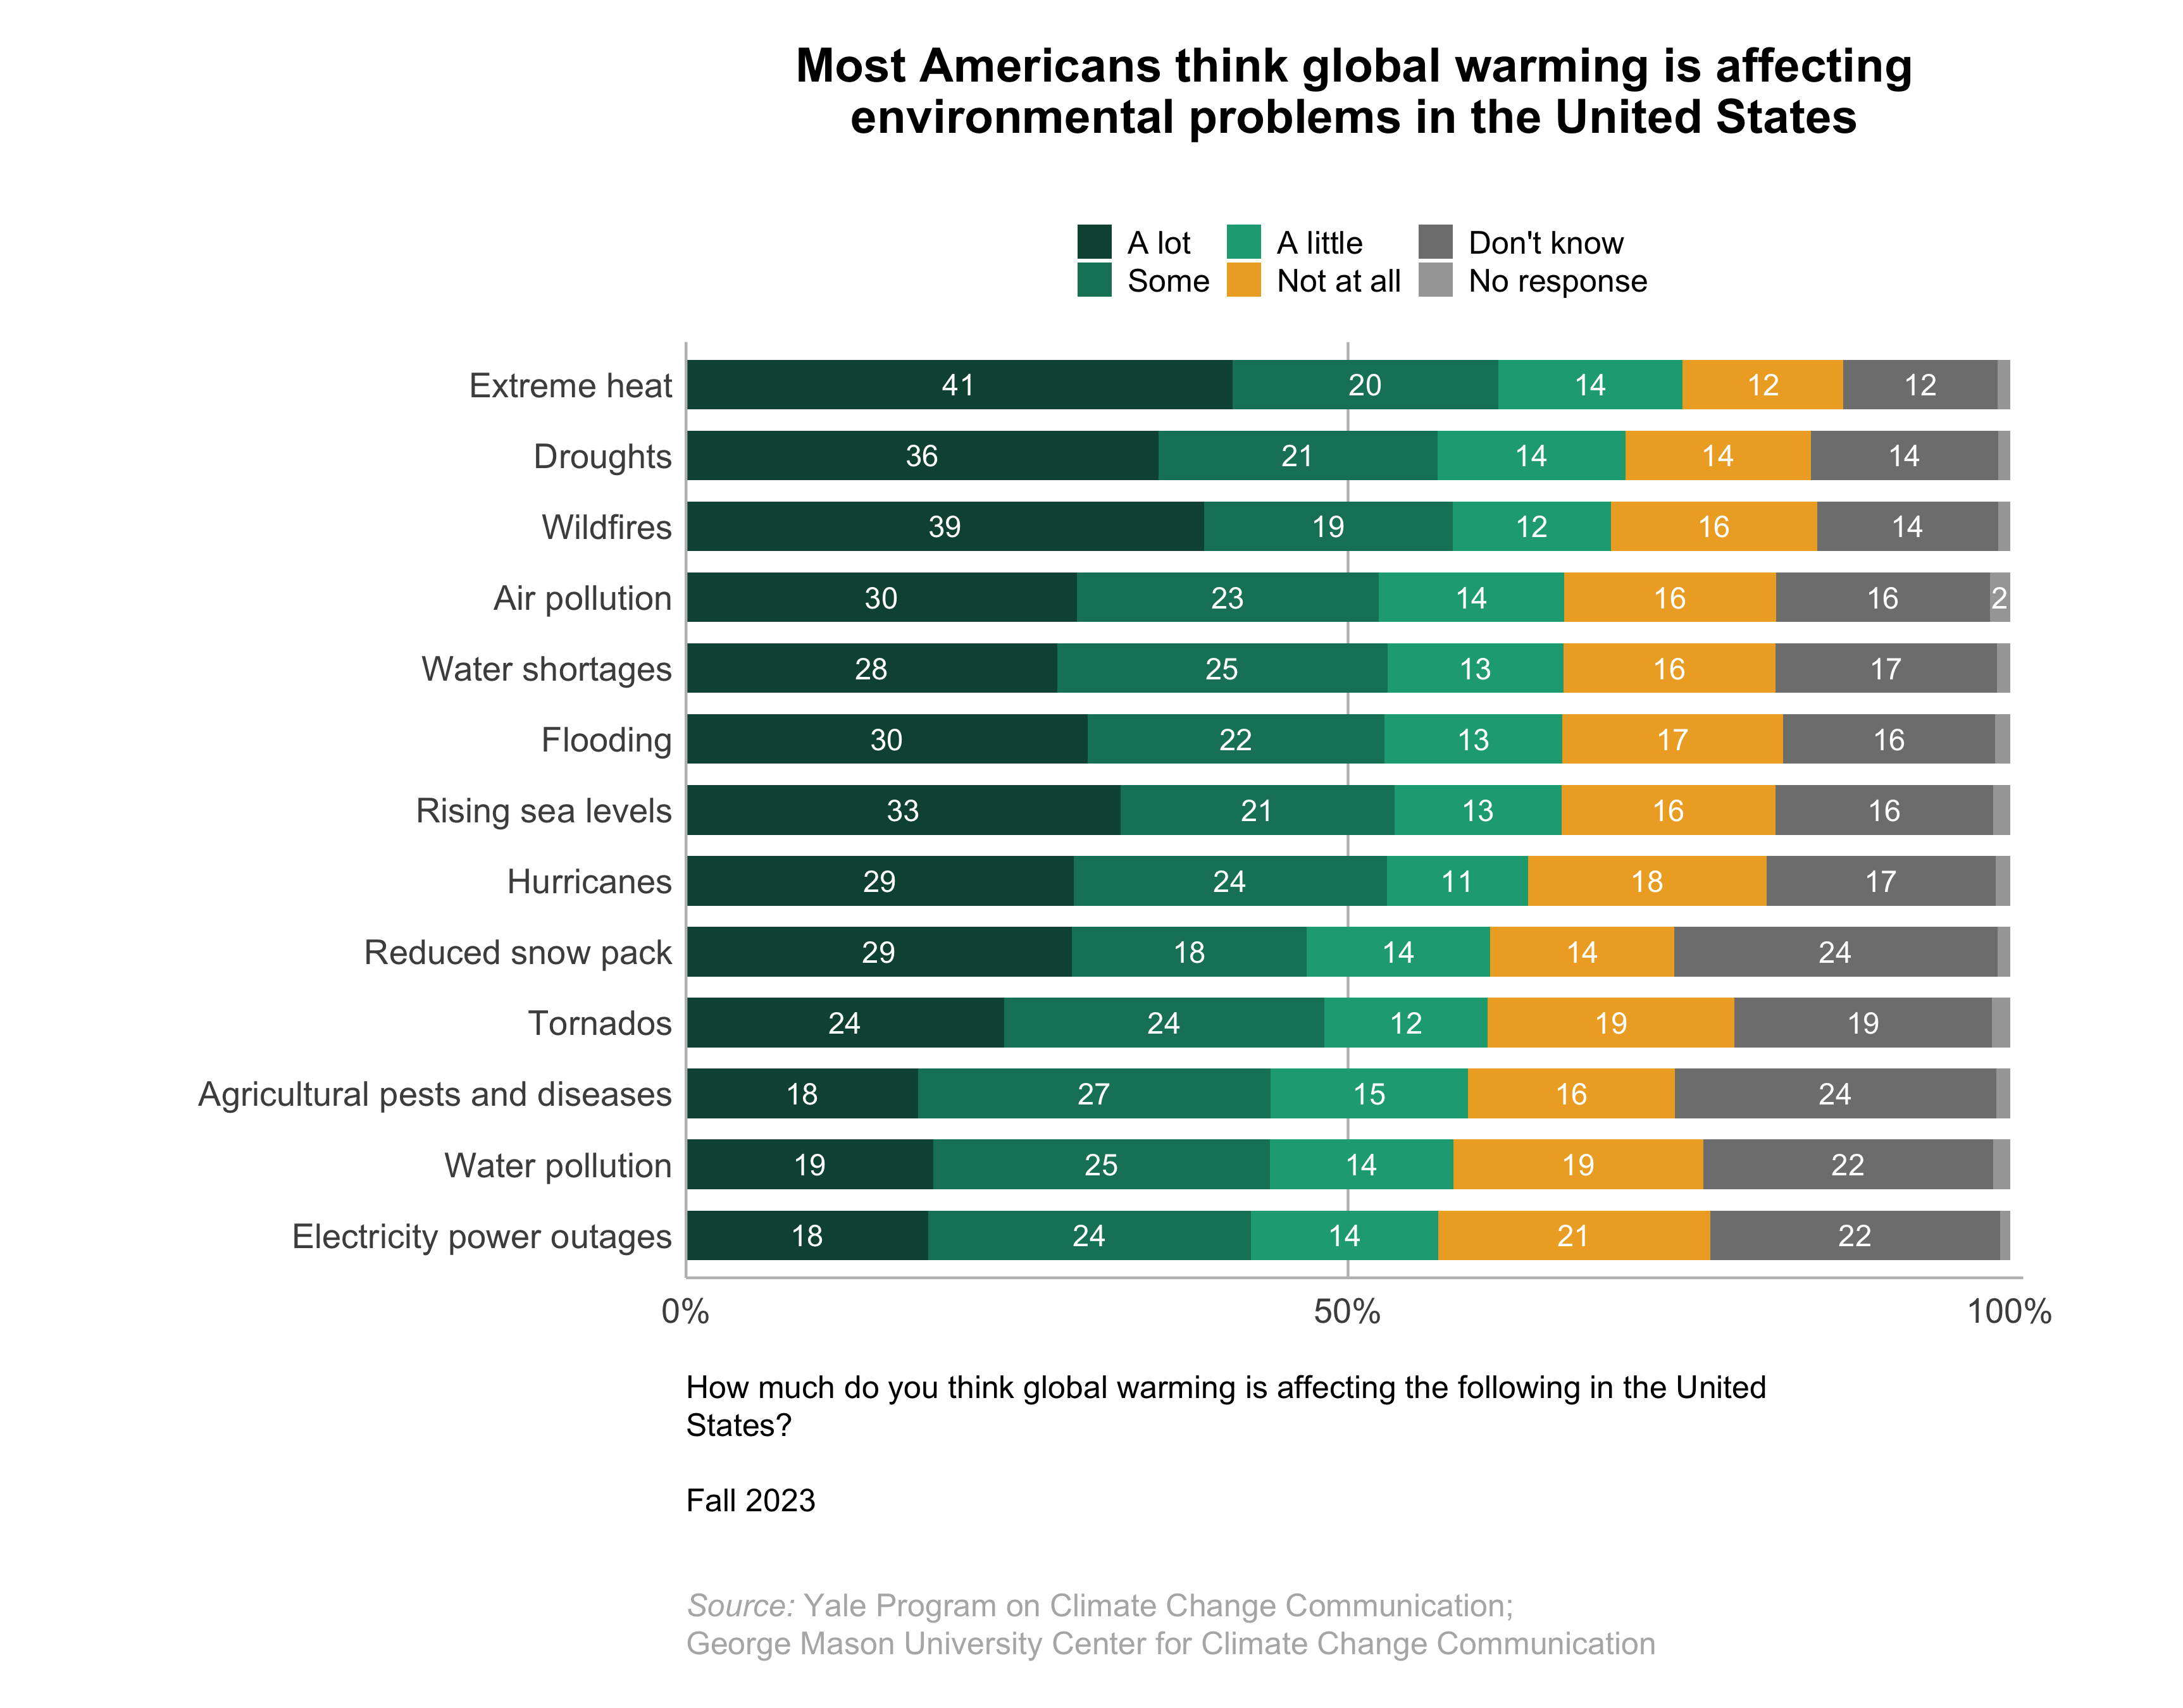 These bar charts show the percentage of Americans who think global warming is affecting environmental problems in the United States, including extreme heat, flooding, wildfires, hurricanes, droughts, water shortages, reduced snow pack, rising sea levels, agricultural pests and diseases, tornados, air pollution, water pollution, and electricity power outages. Most Americans think global warming is affecting environmental problems in the United States. Data: Climate Change in the American Mind, Fall 2023. Refer to the data tables in Appendix 1 of the report for all percentages.